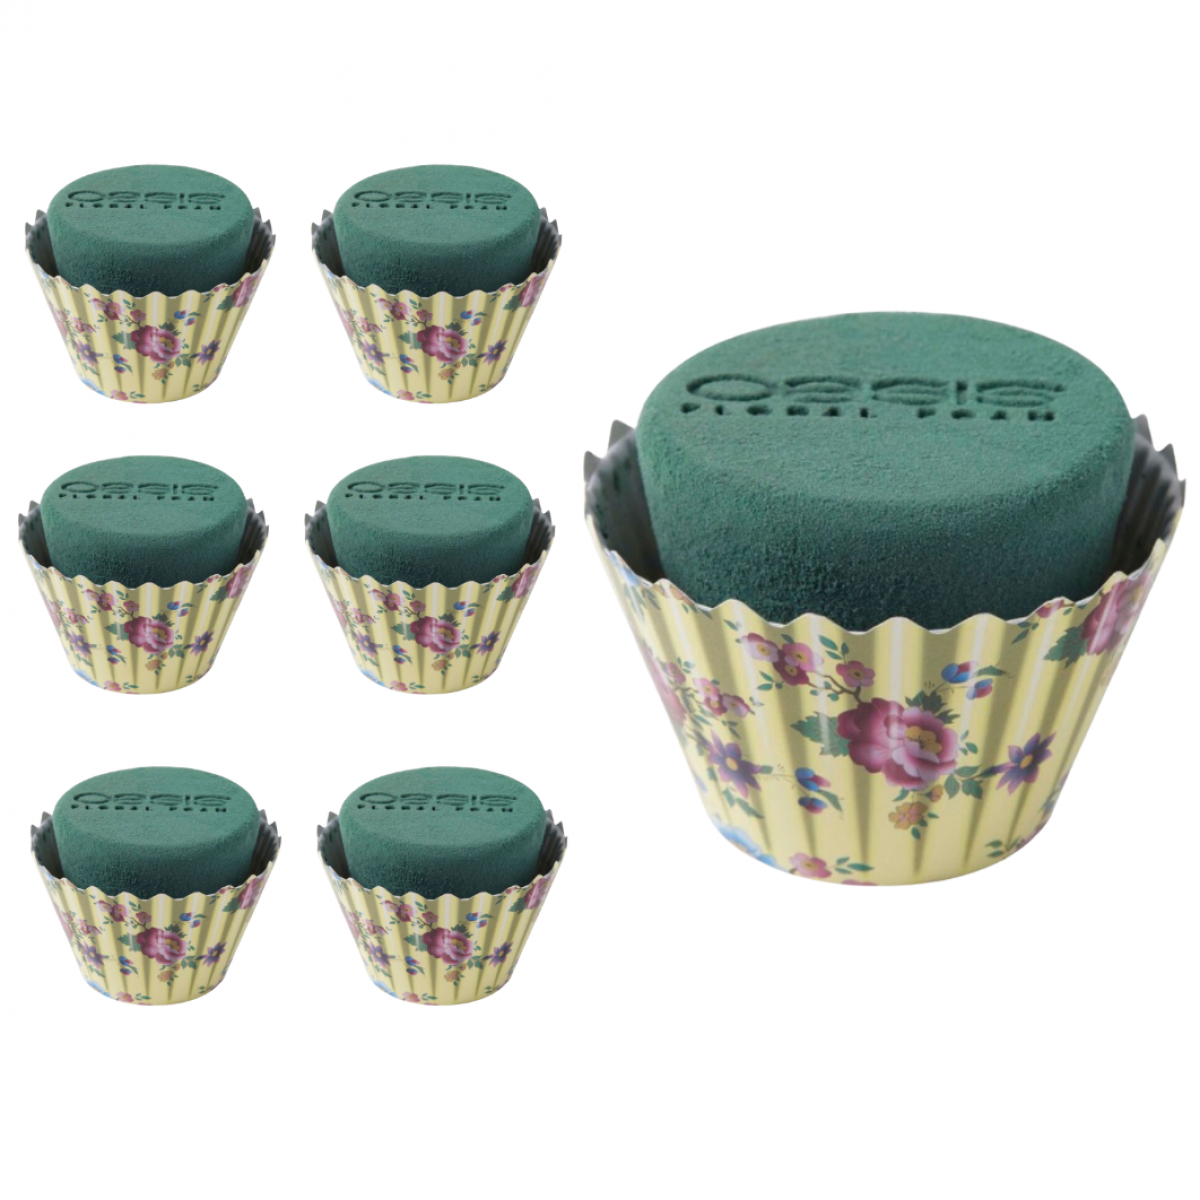 Cupcake 120mm (6 No) Oasis Floral Foam Shape With Skirt